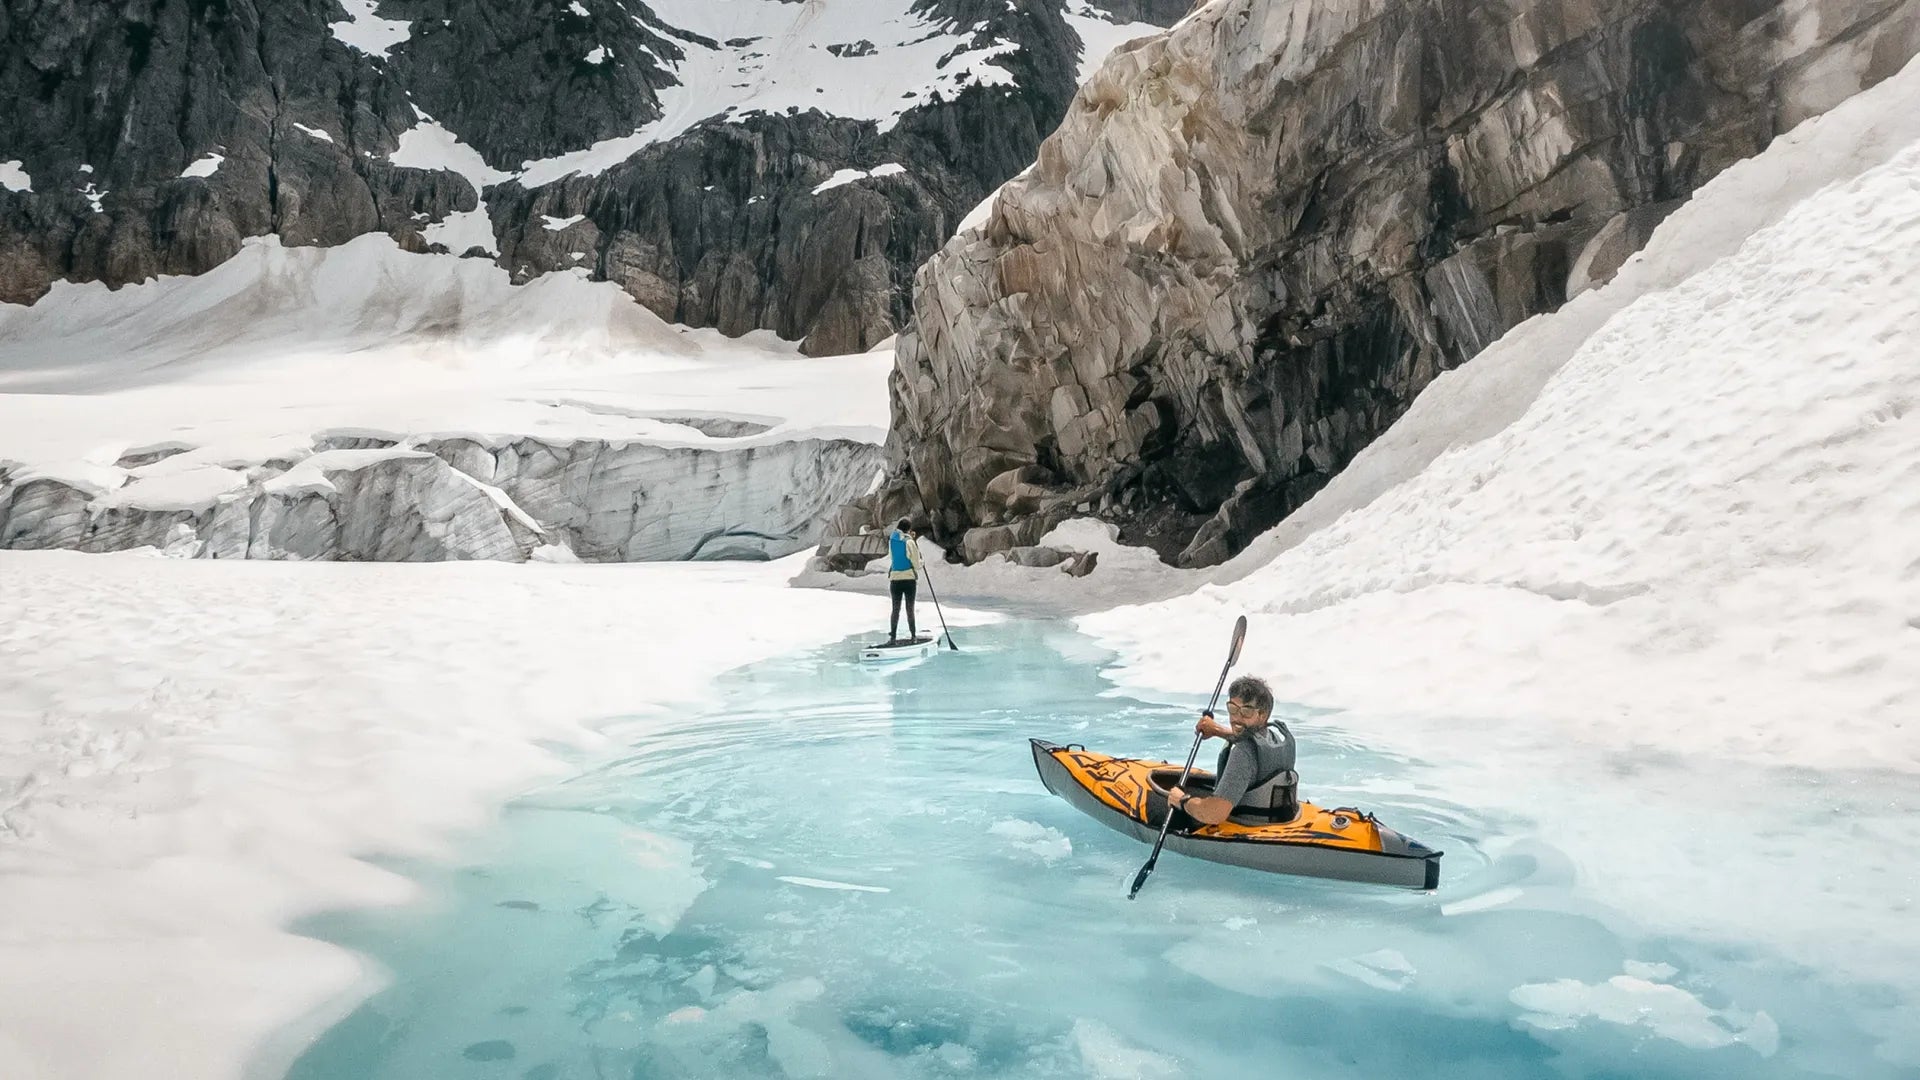 Lifestyle photo of a kayaker and paddlevboarder paddling through an icy river in the snowy mountains